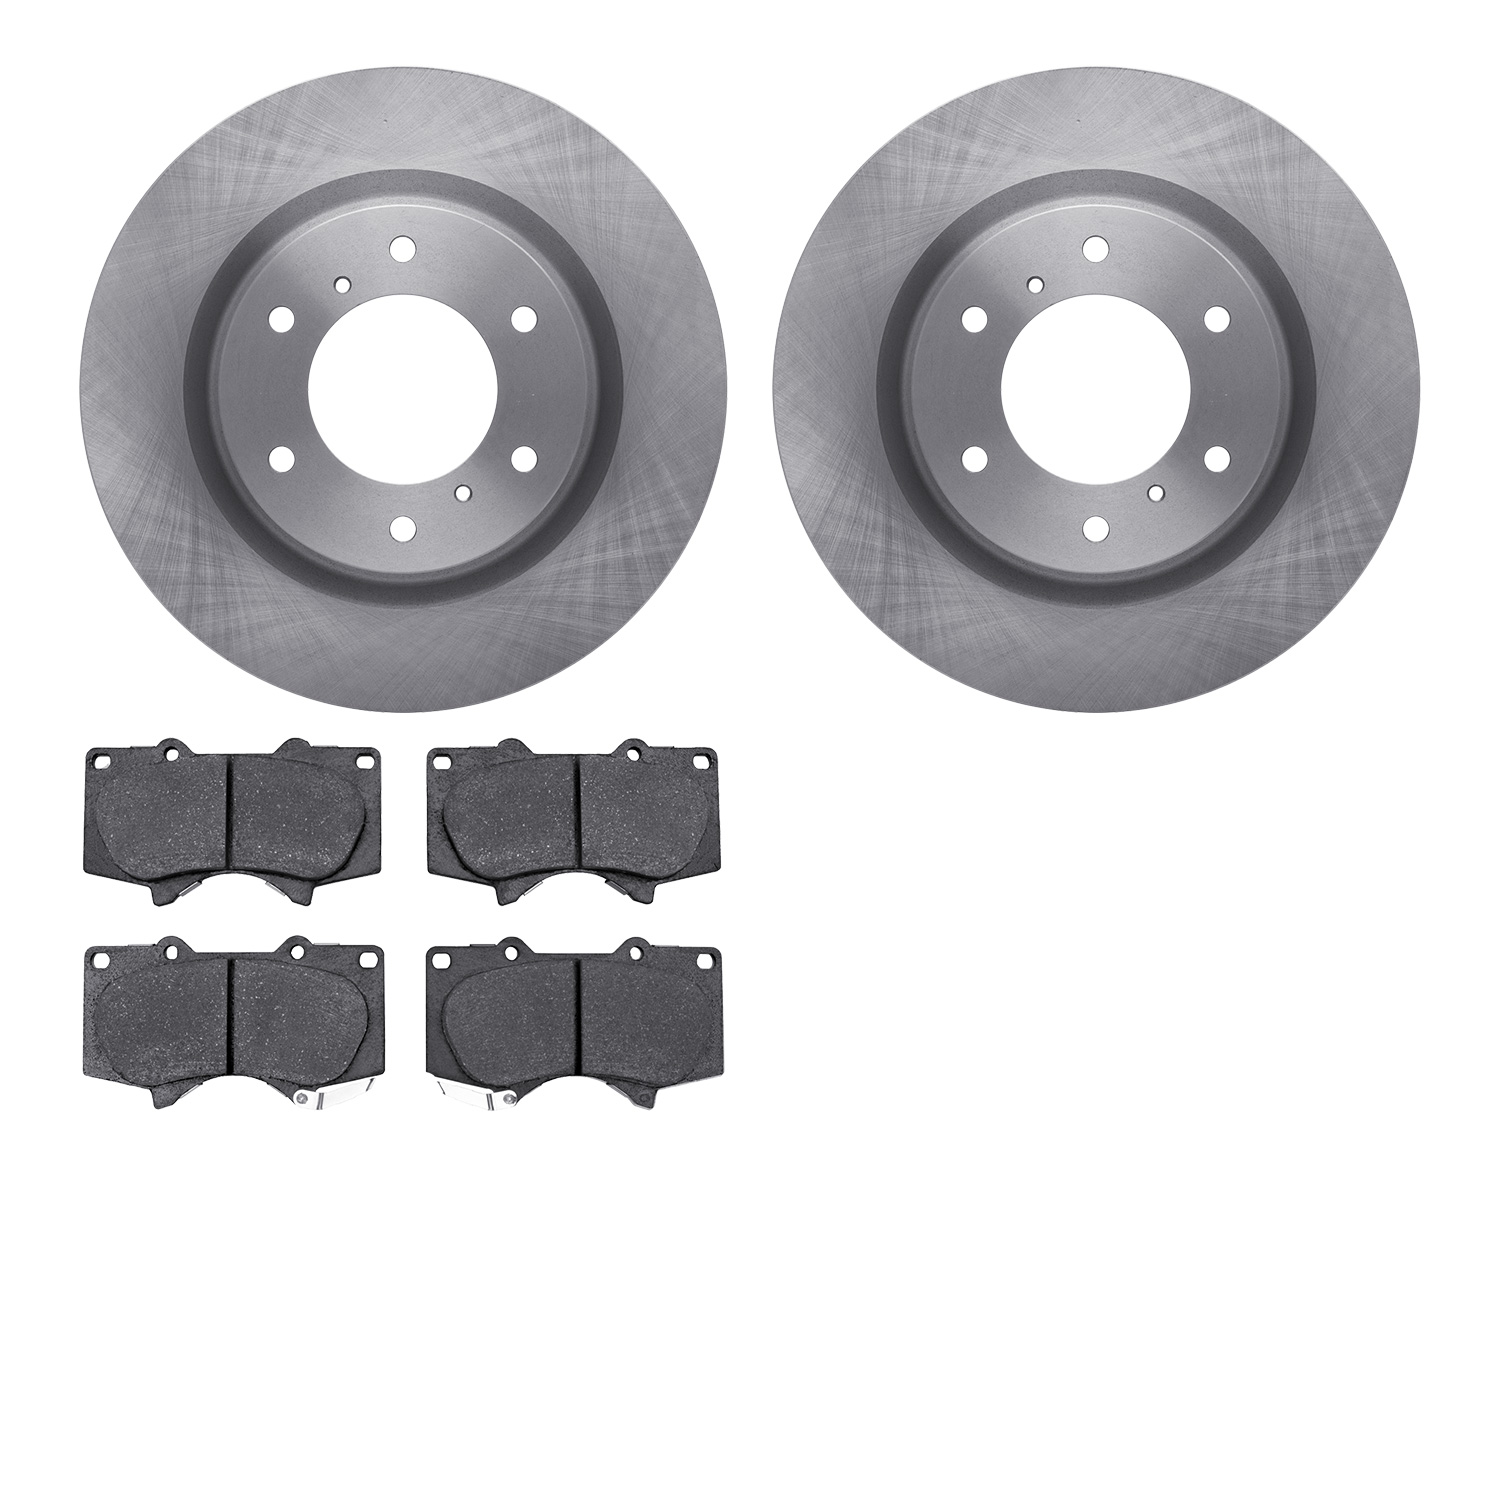 6402-92004 Brake Rotors with Ultimate-Duty Brake Pads, 2008-2017 Mitsubishi, Position: Front